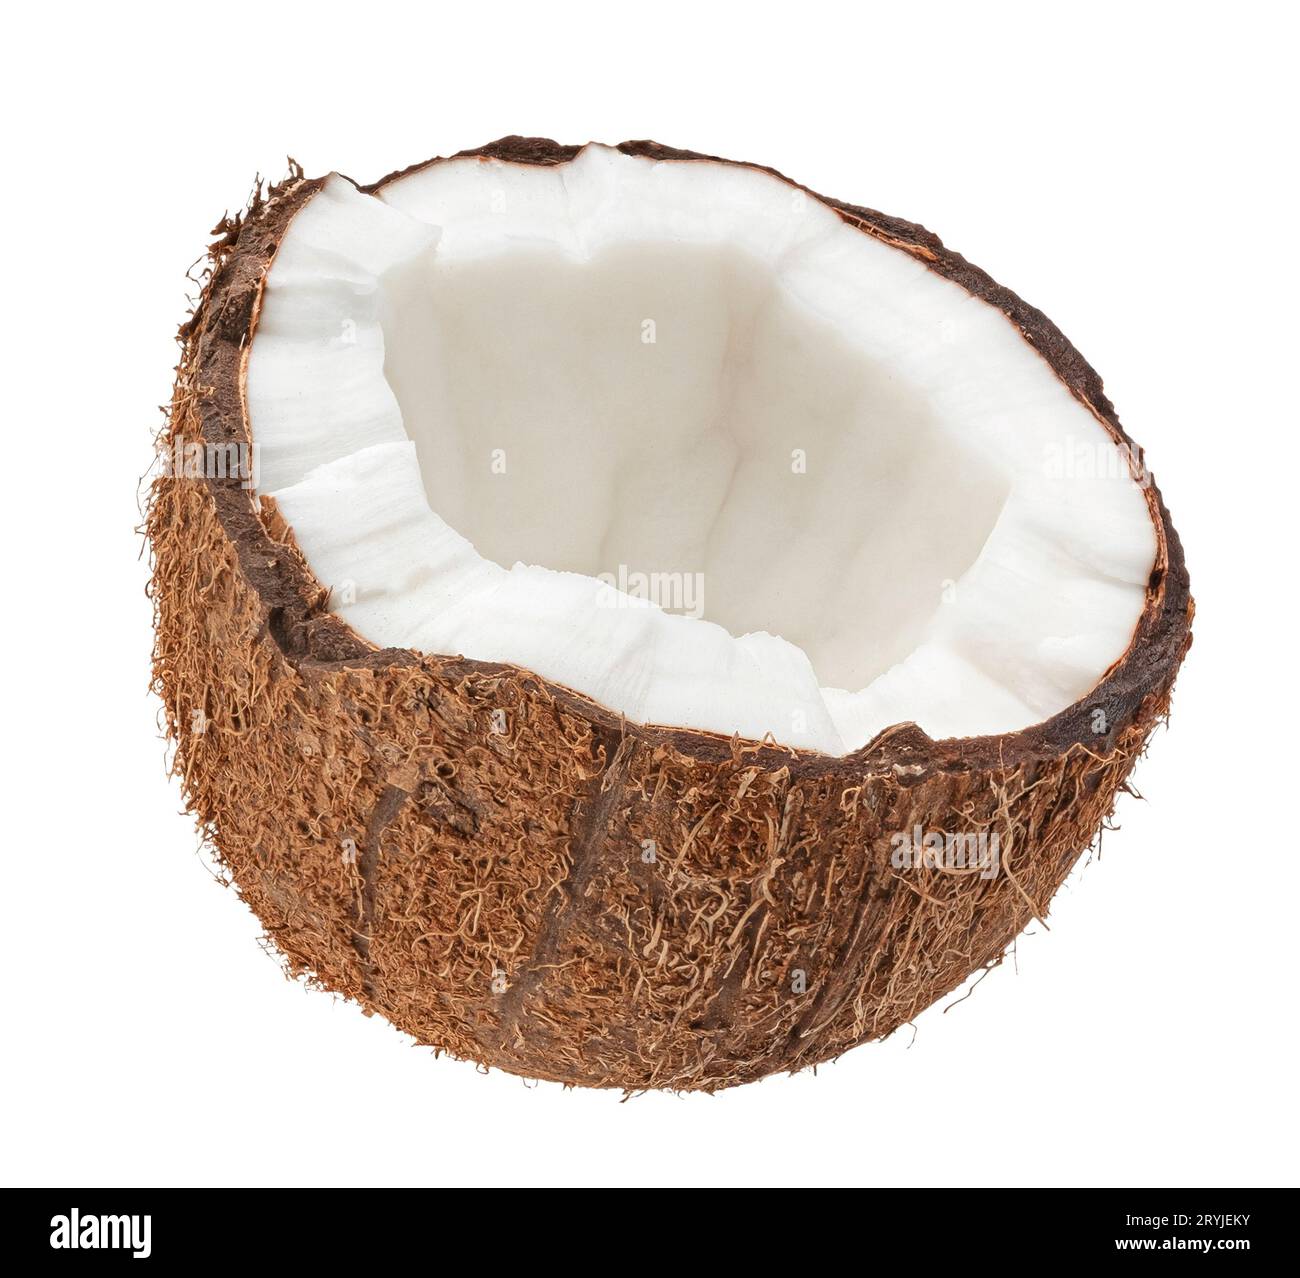 Coconut half isolated on white background, full depth of field Stock Photo